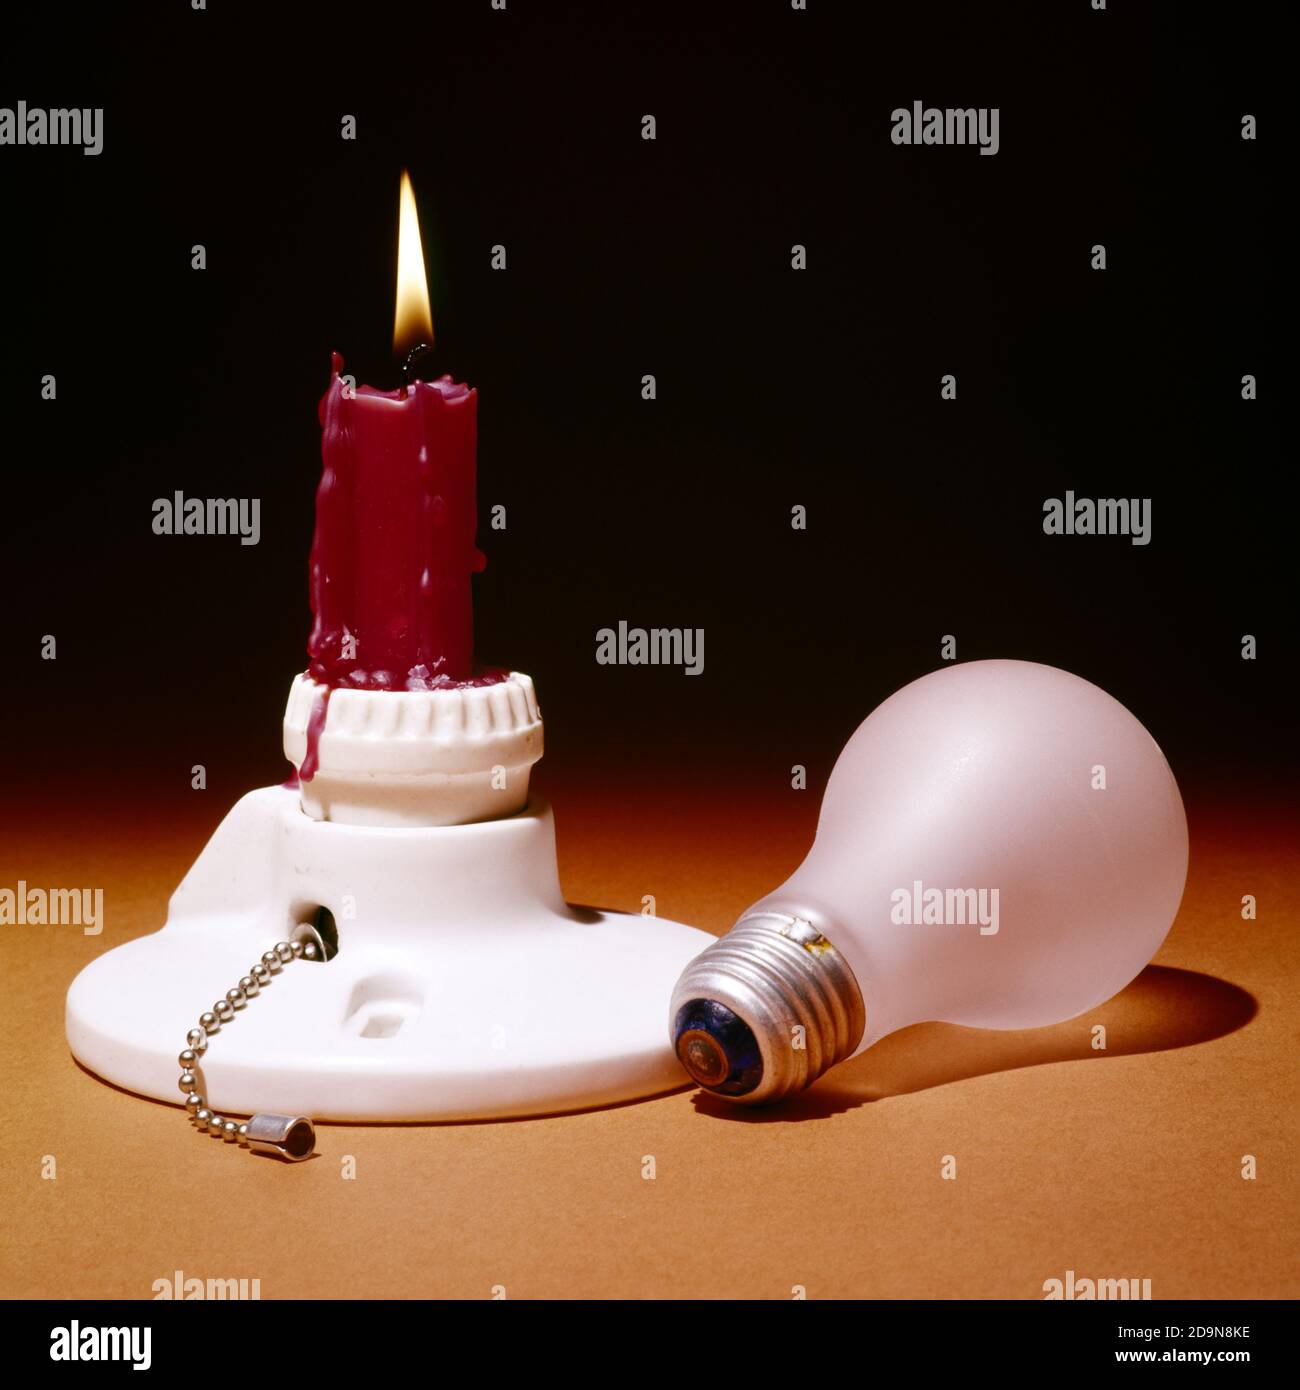 1970s RED CANDLE BURNING IN PORCELAIN ELECTRICAL LIGHT SOCKET WITH LIGHT BULB LYING ON SIDE - ks13521 HAR001 HARS RESOURCEFUL SOCKET SYMBOLIC APOCALYPSE CONCEPTS FAILURE SOLUTIONS SURVIVAL BLACKOUT CONSERVATION HAR001 OLD FASHIONED REPRESENTATION Stock Photo